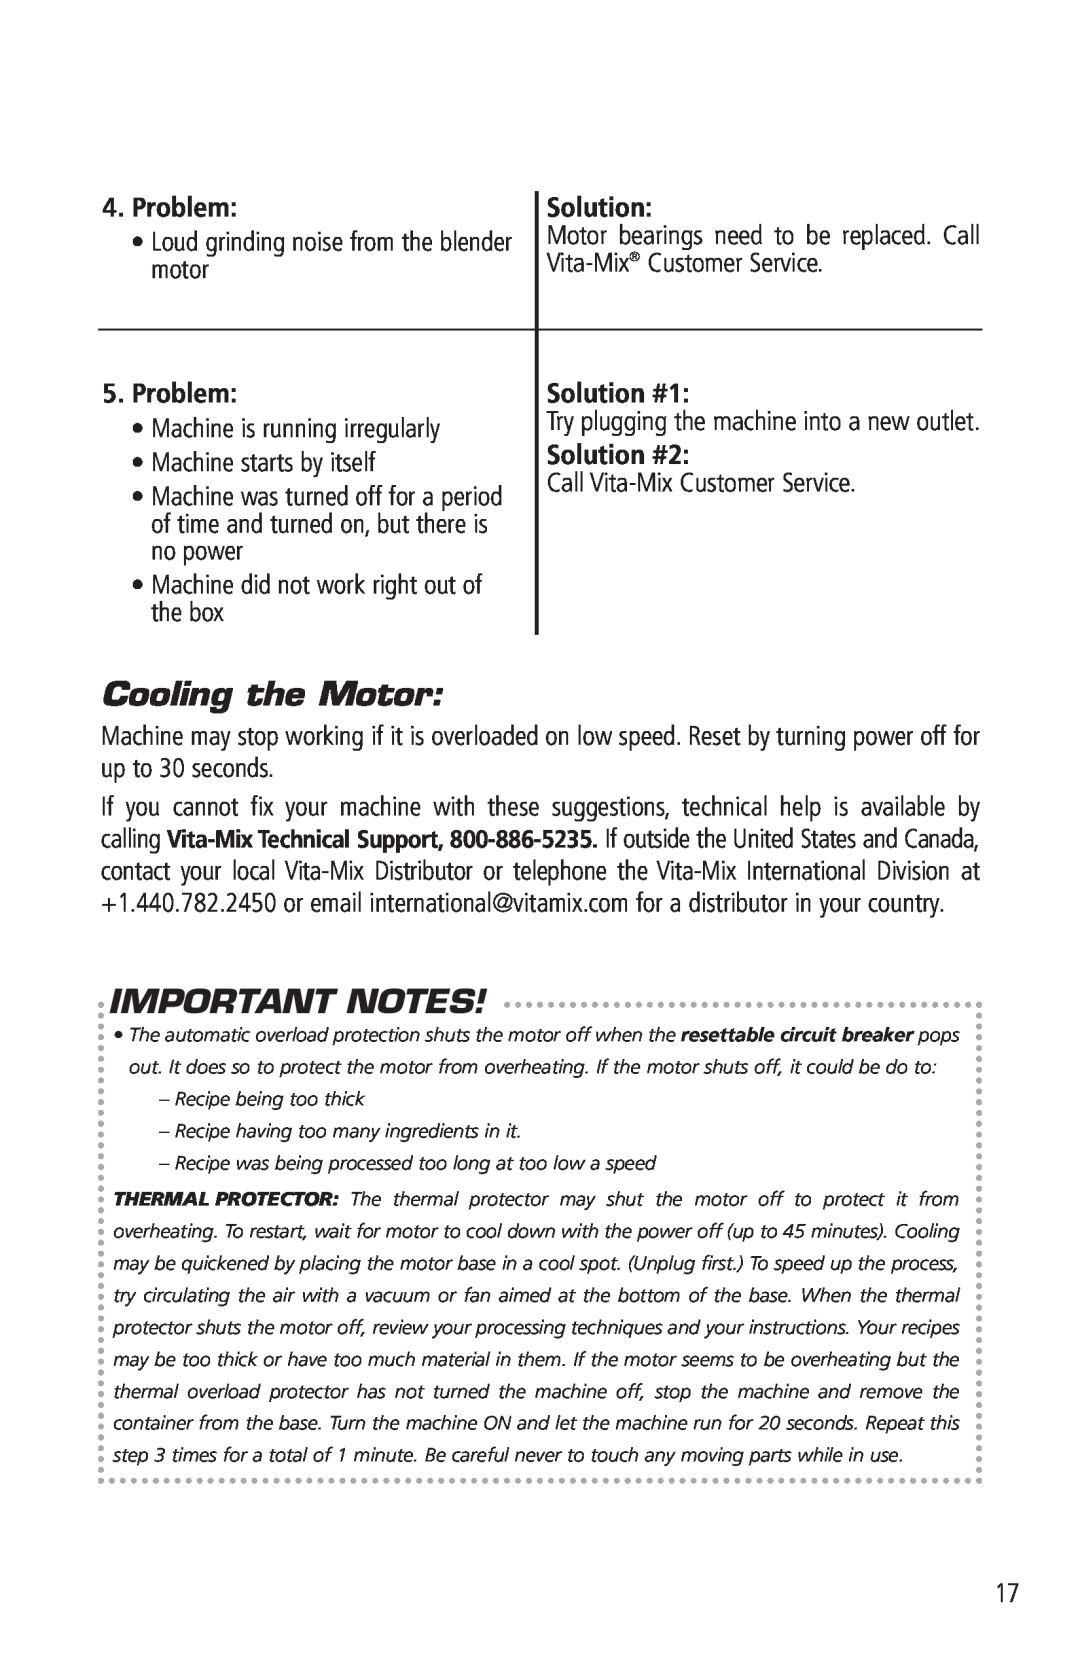 Vita-Mix VM0141 manual Cooling the Motor, Problem, Important Notes, Solution #1, Solution #2 